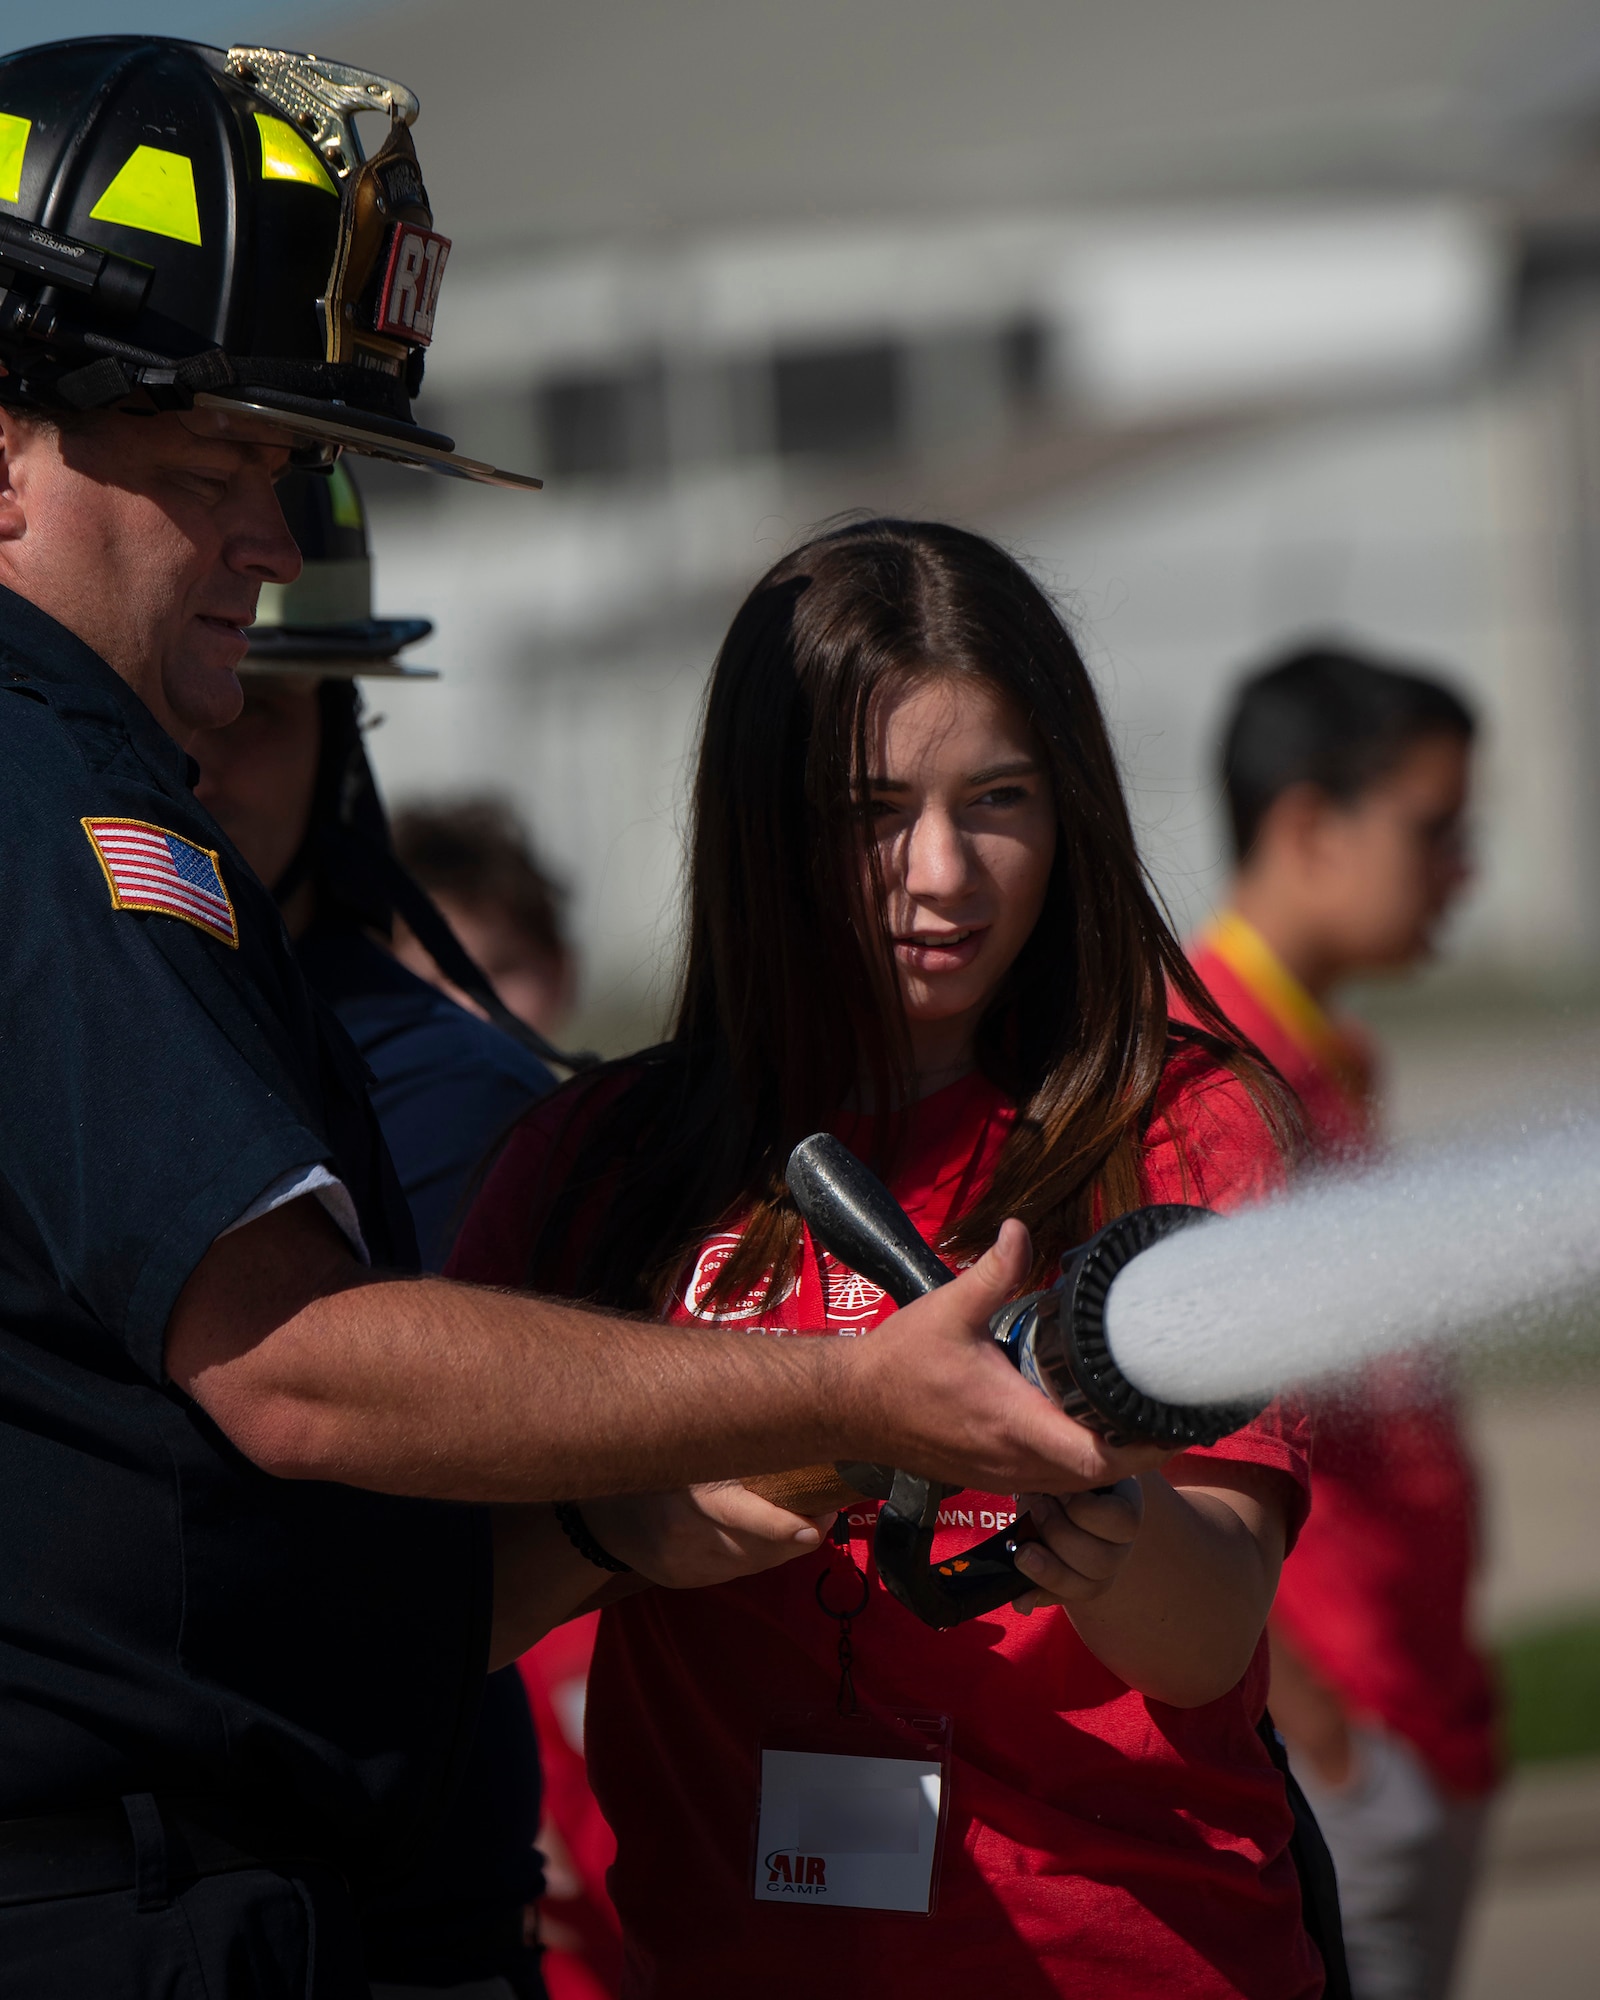 A camper handles a fire hose with the help of firefighter Thomas Trost, 788th Civil Engineer Squadron, at the main fire station on Wright-Patterson Air Force Base, Ohio, June 15, 2021. Air Camp participants came to Wright-Patt to tour aircraft, learn about firefighting and visit the U.S. Air Force School of Aerospace Medicine. (U.S. Air Force photo by R.J. Oriez) (Name tag blurred for security and privacy)